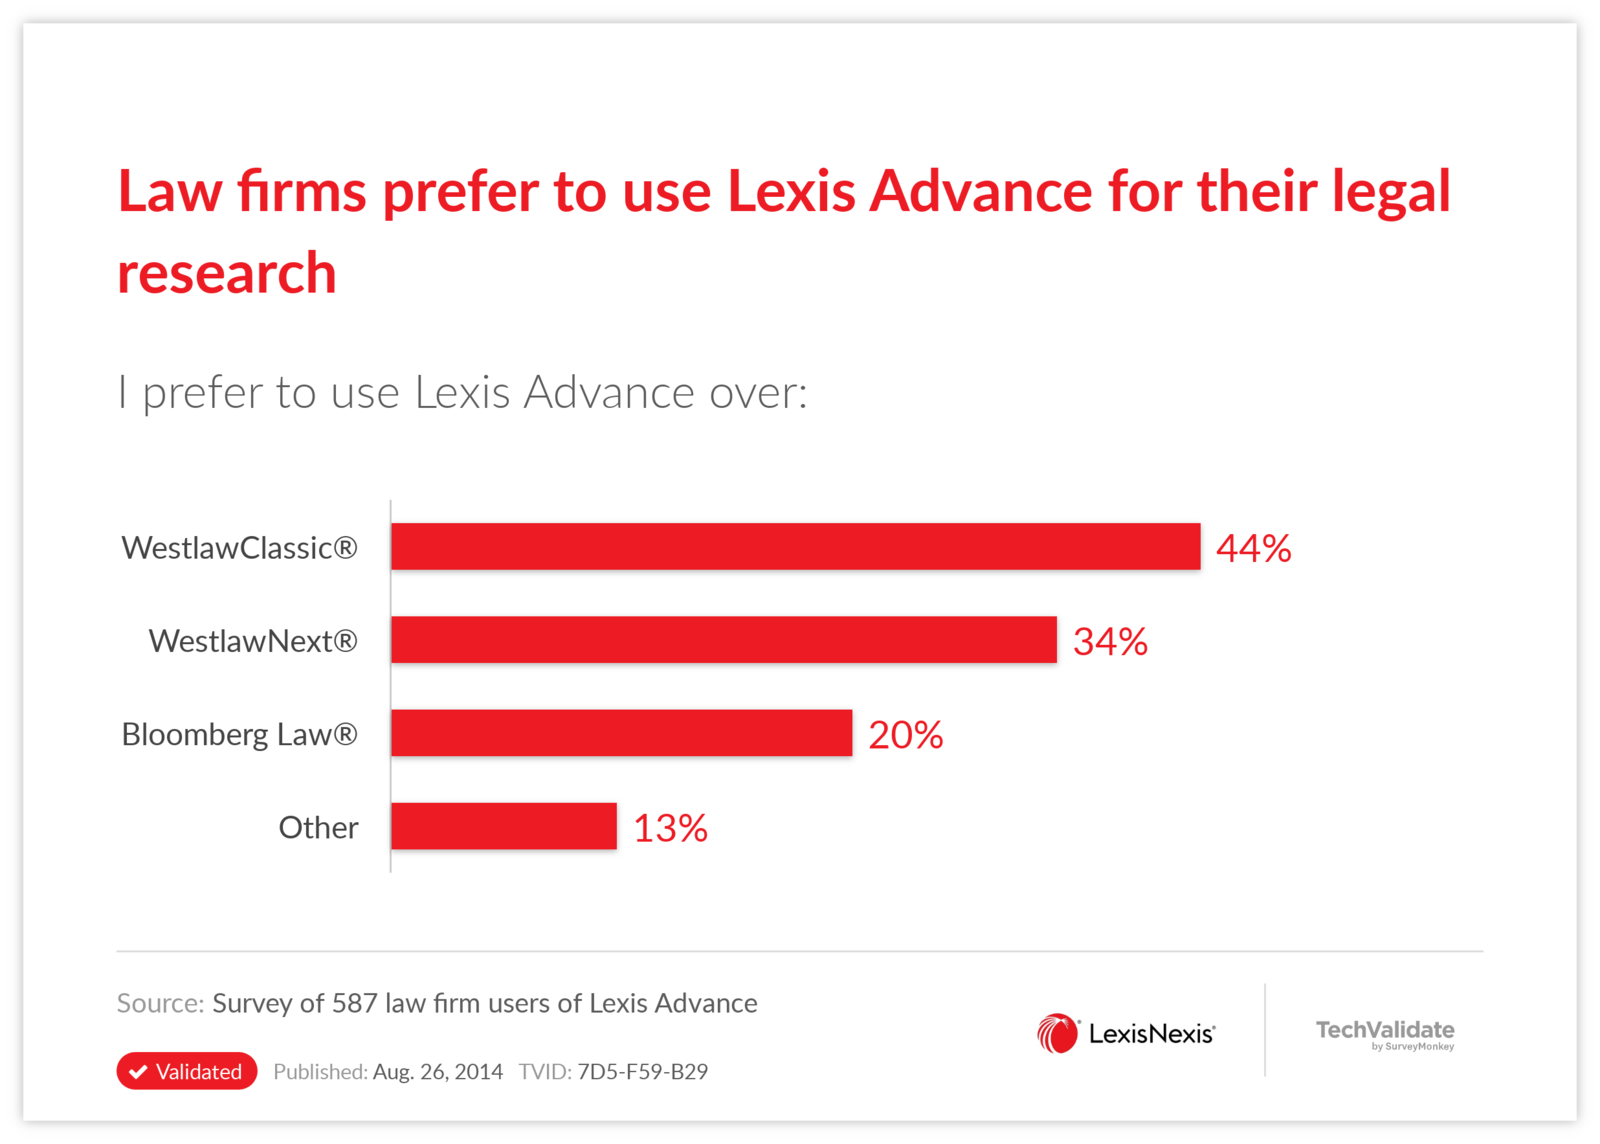 Law firms prefer to use Lexis Advance for their legal research